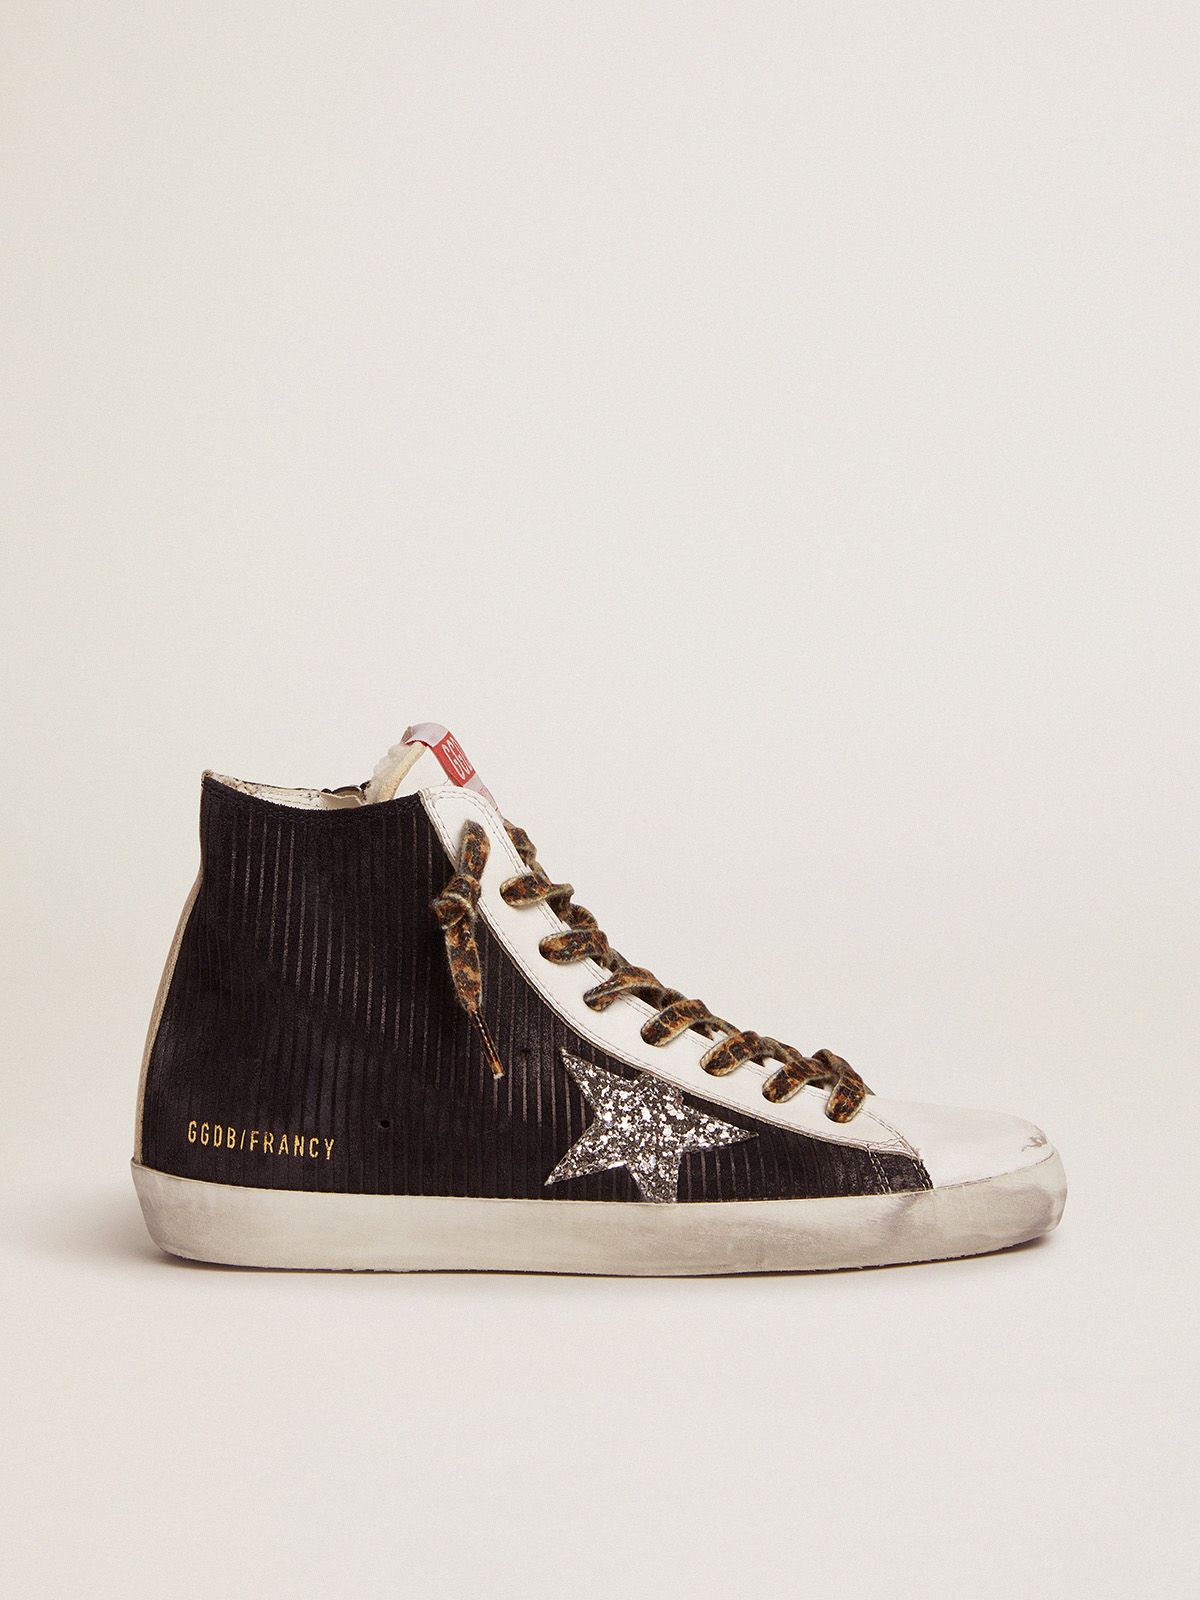 Golden Goose Uomo Saldi Francy sneakers in black suede with corduroy print and shearling lining